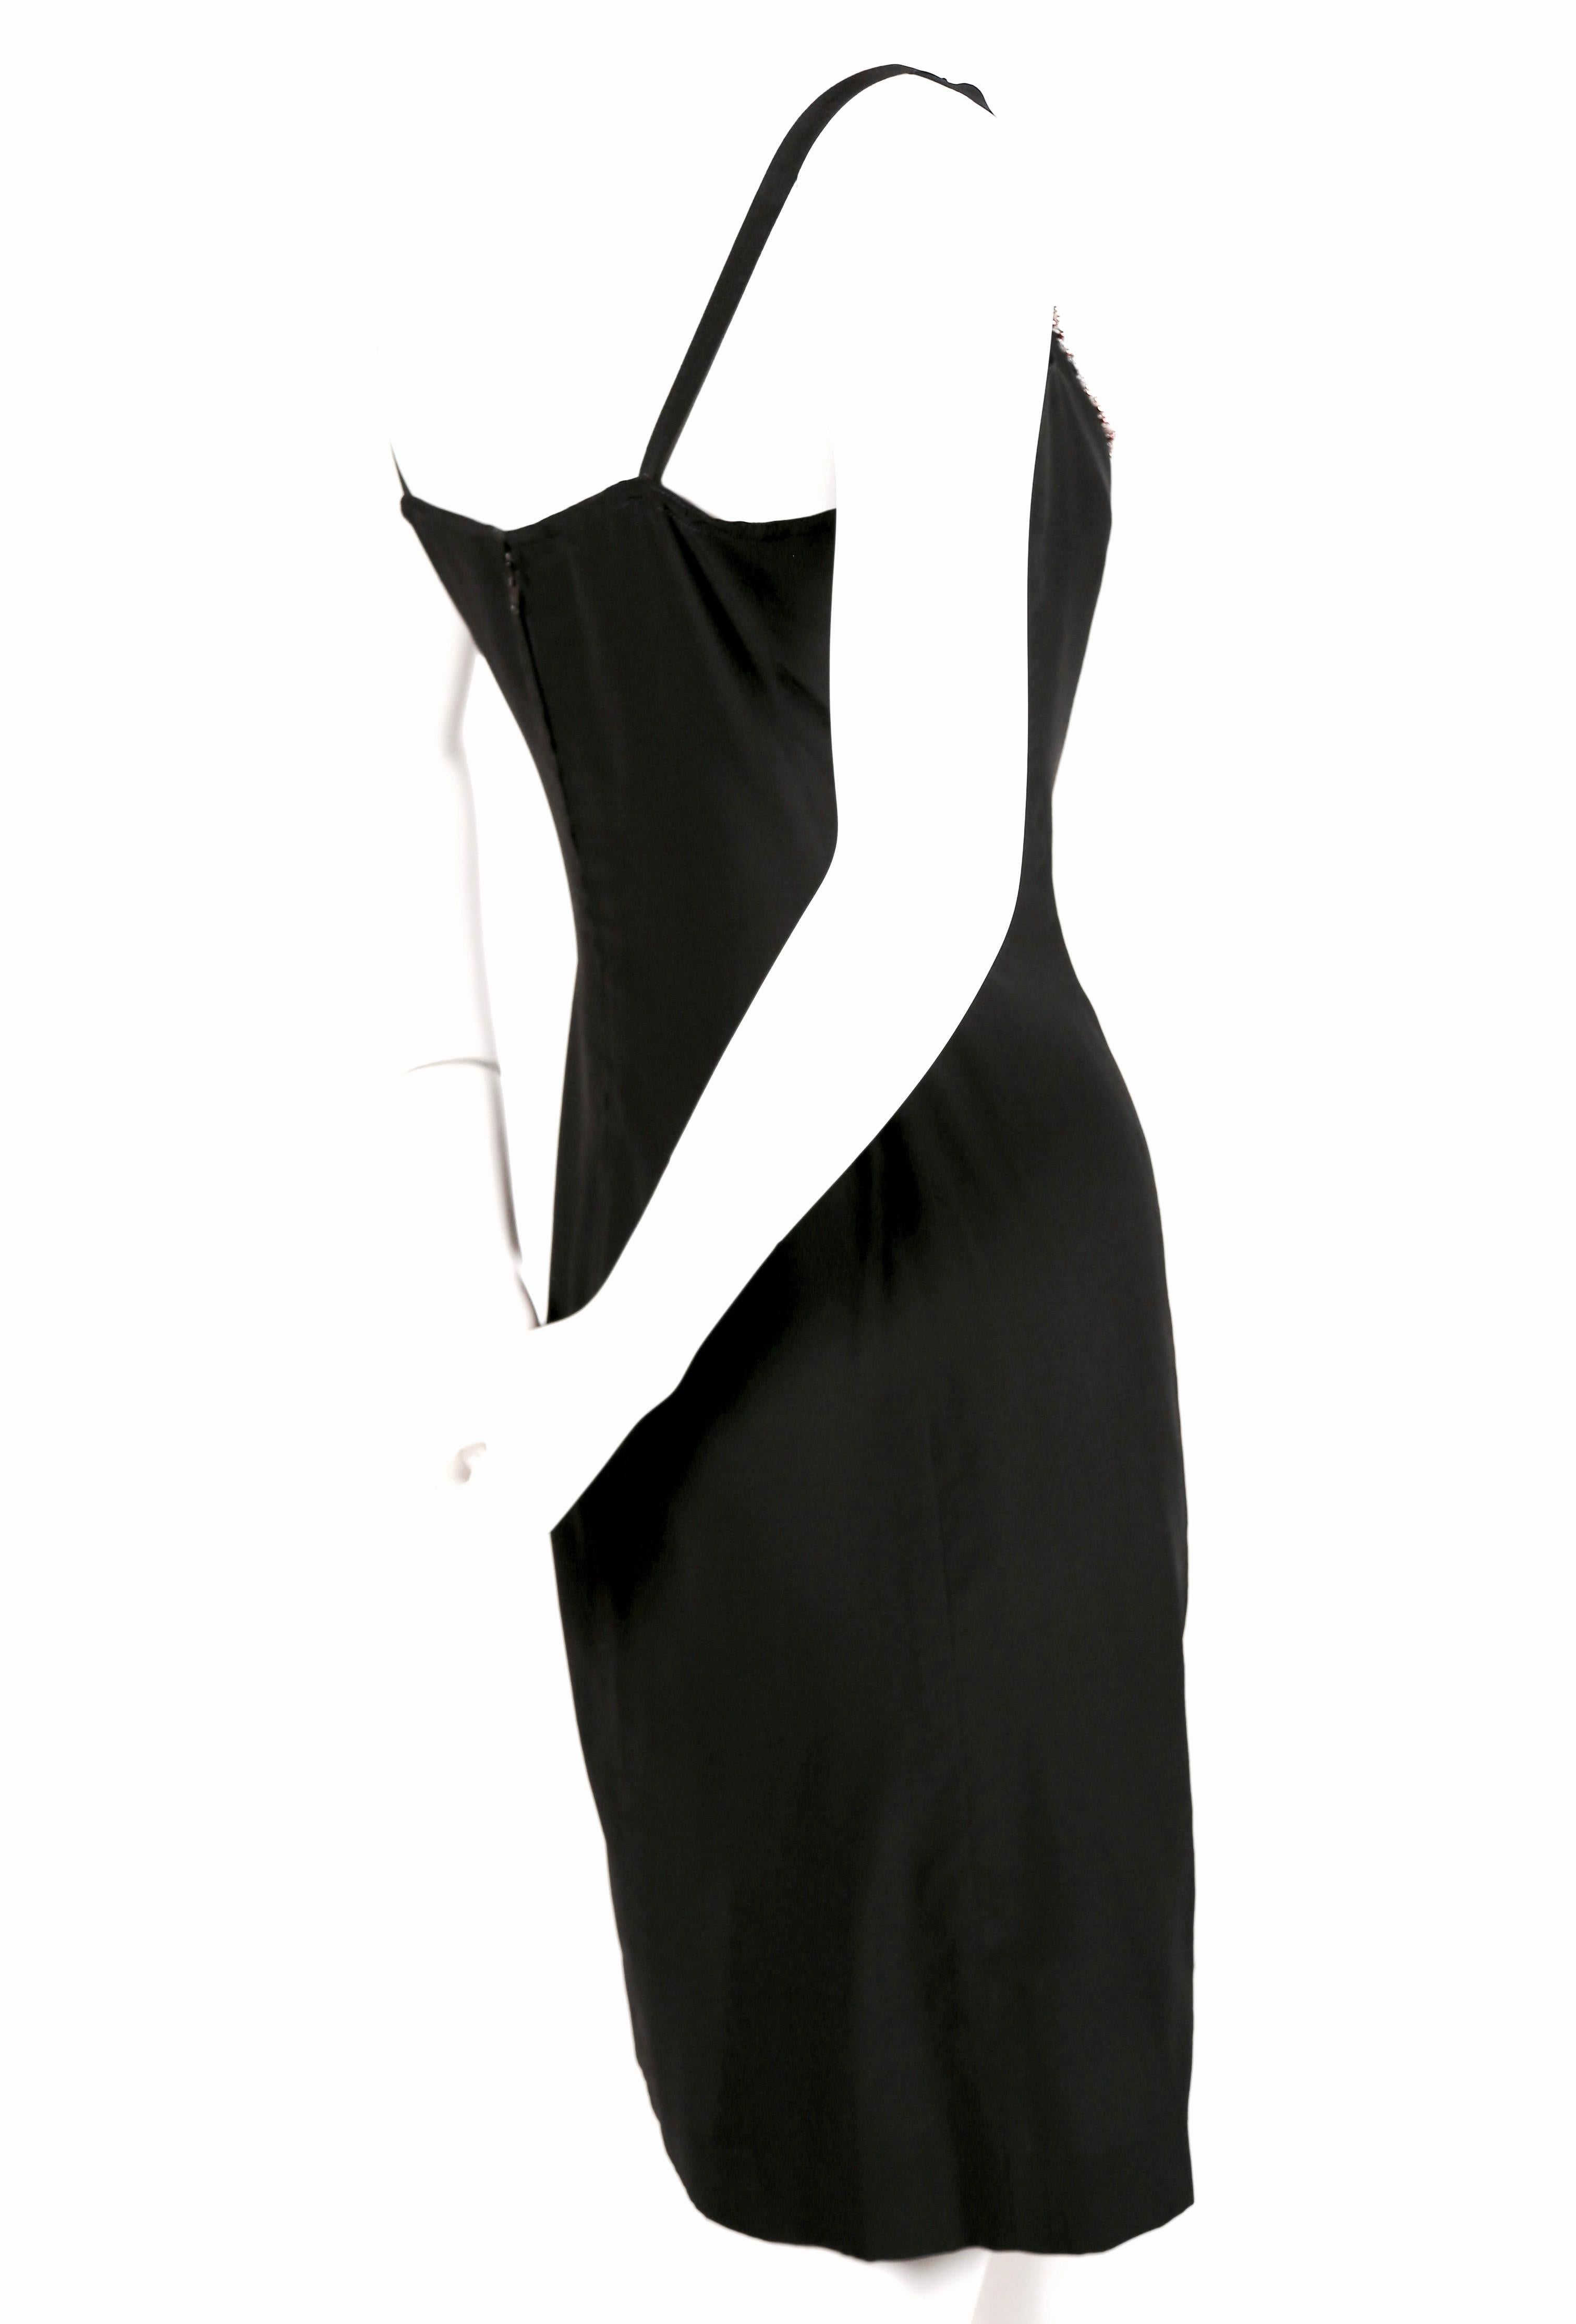 1970's KARL LAGERFELD for CHLOE black silk dress with beads In Good Condition For Sale In San Fransisco, CA